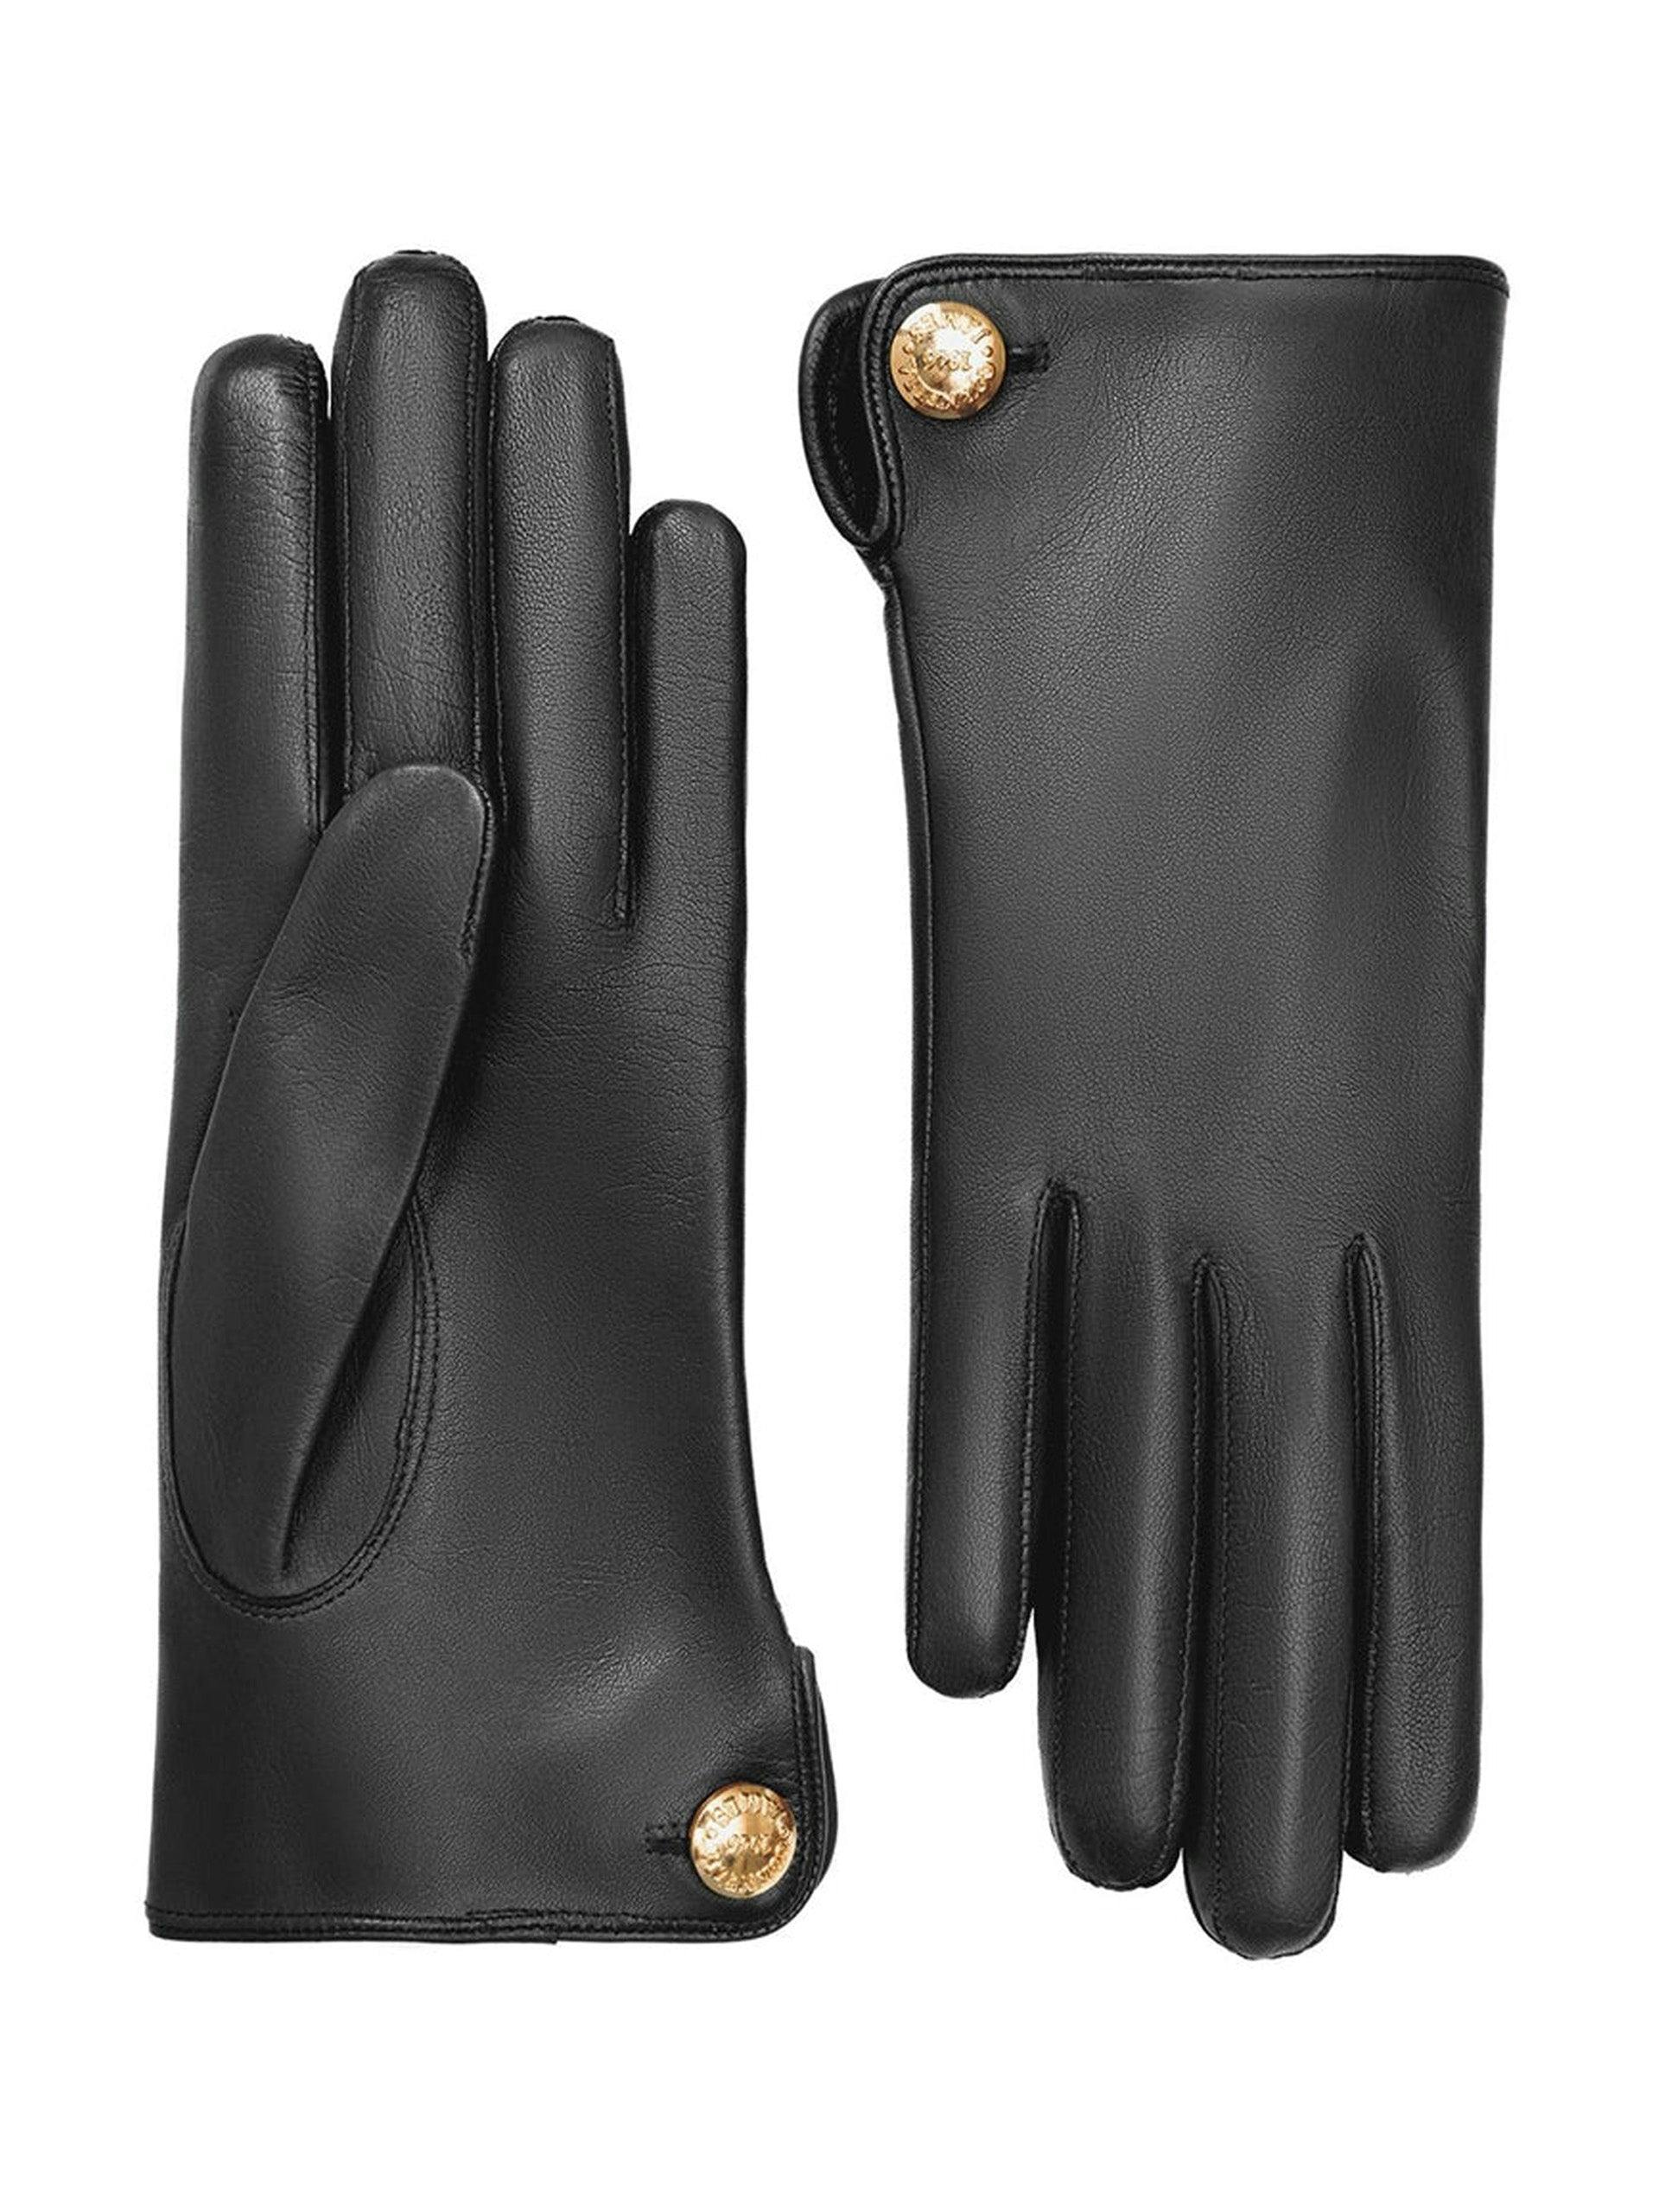 Black leather gloves with gold buttons